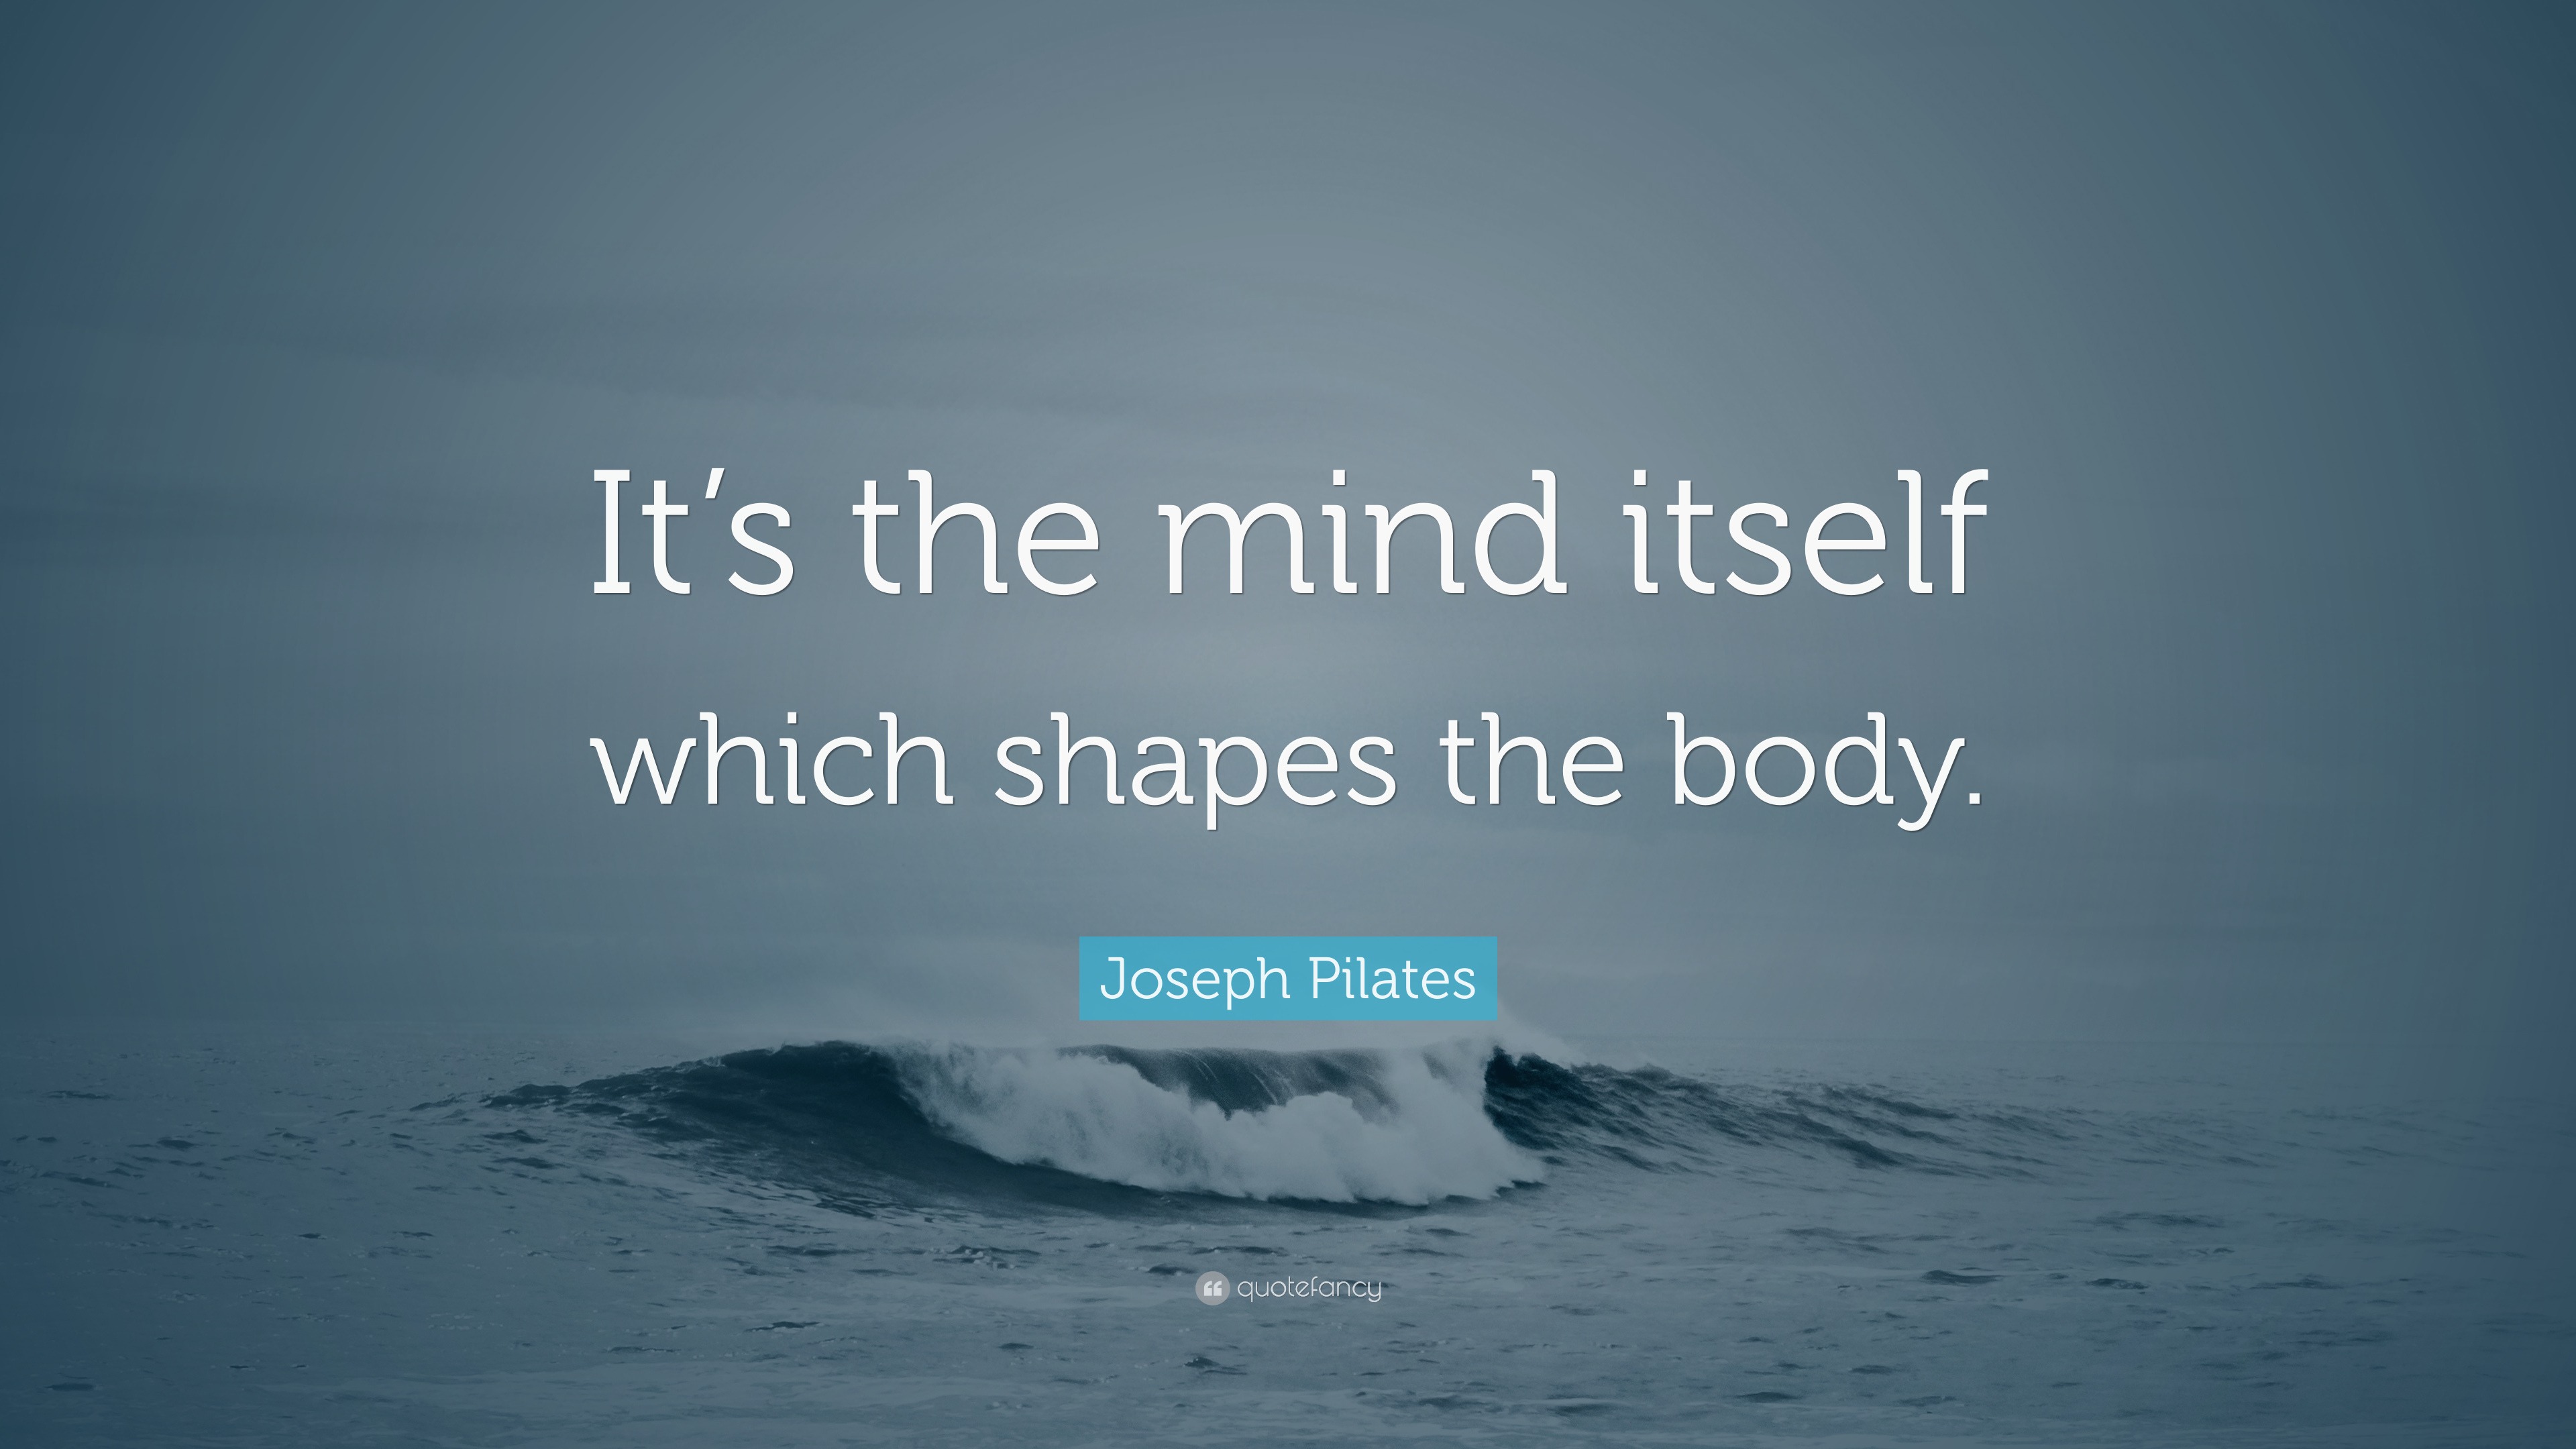 Joseph Pilates Quote: “It's the mind itself which shapes the body.”